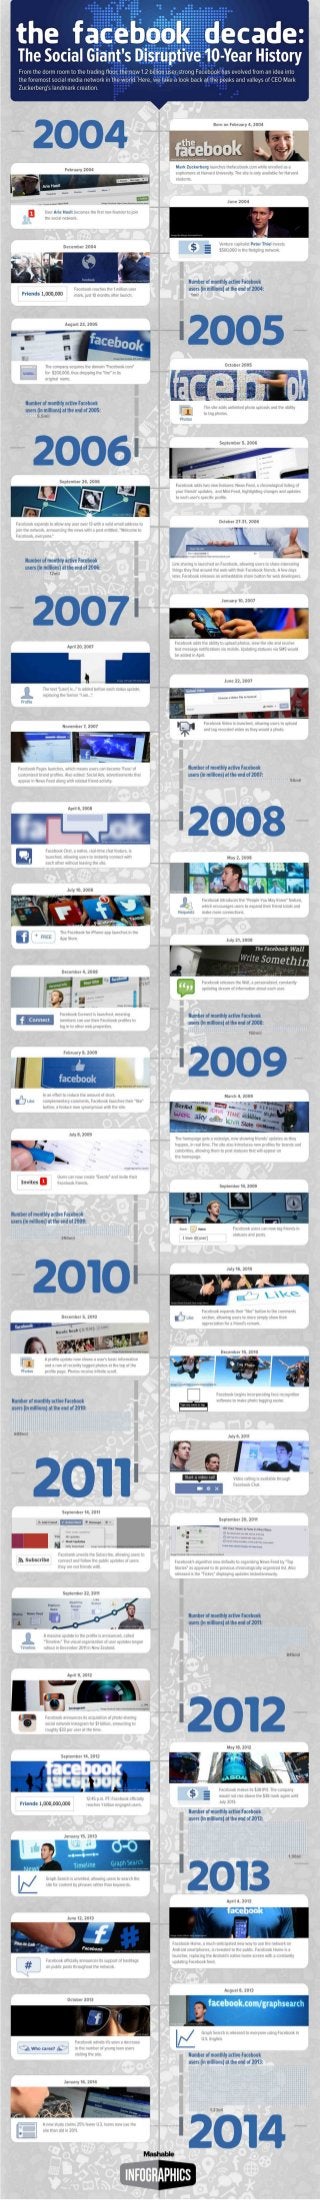 The Facebook Decade: A Review of Facebook's History